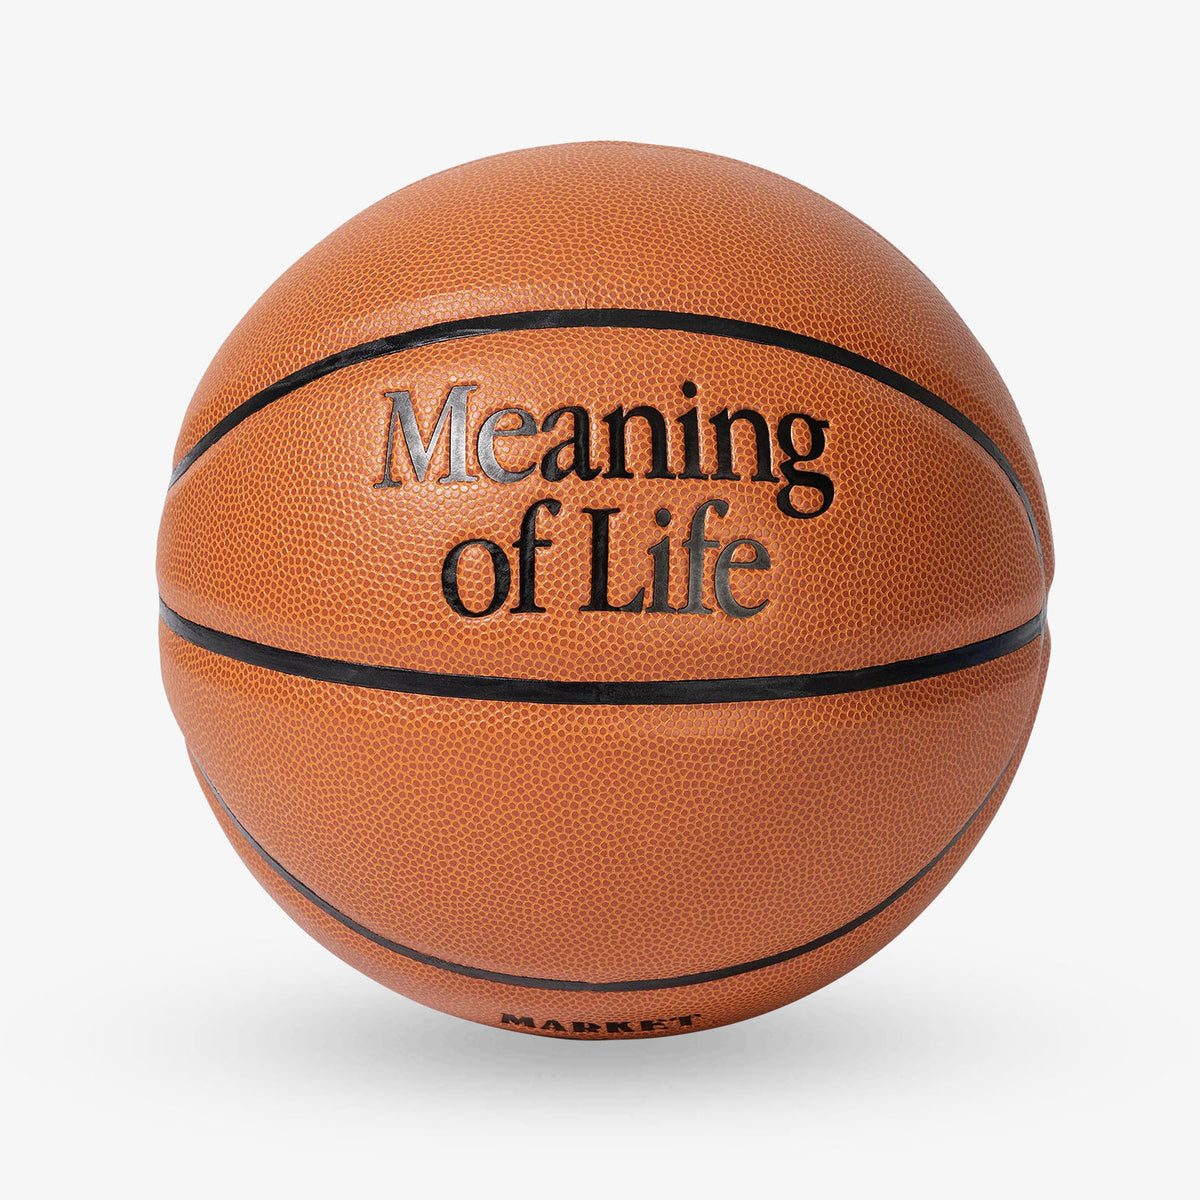 Meaning of Life Basketball